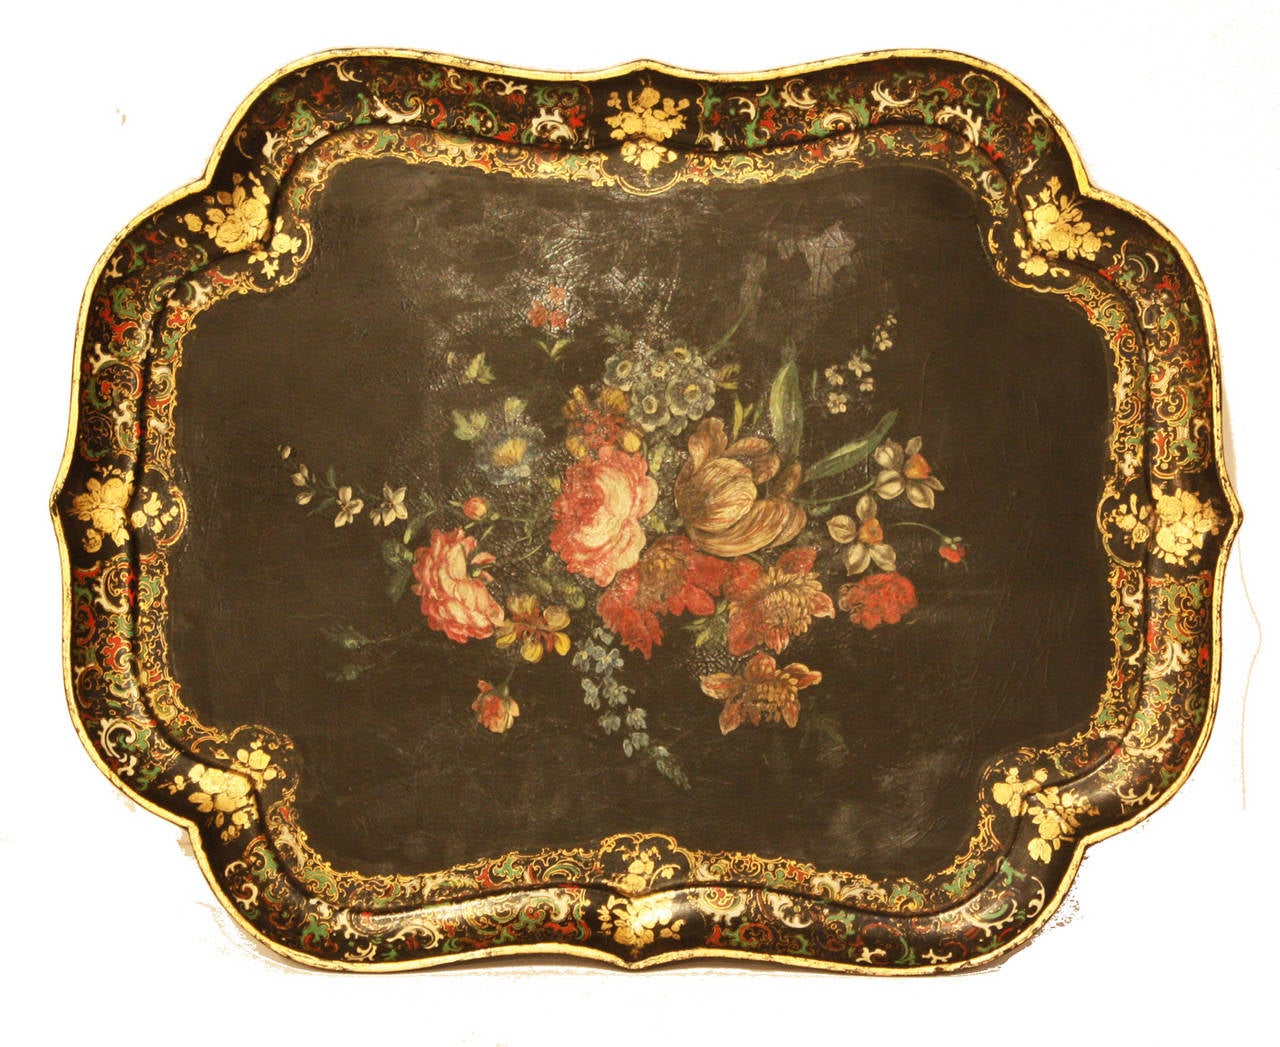 Regency papier mâché tray signed by Henry Clay, King St., Covent Garden, circa 1810. Now mounted on custom base. Clay was the most famous of all English papier mâché manufacturers and held a number of Royal warrants. His work is exhibited in